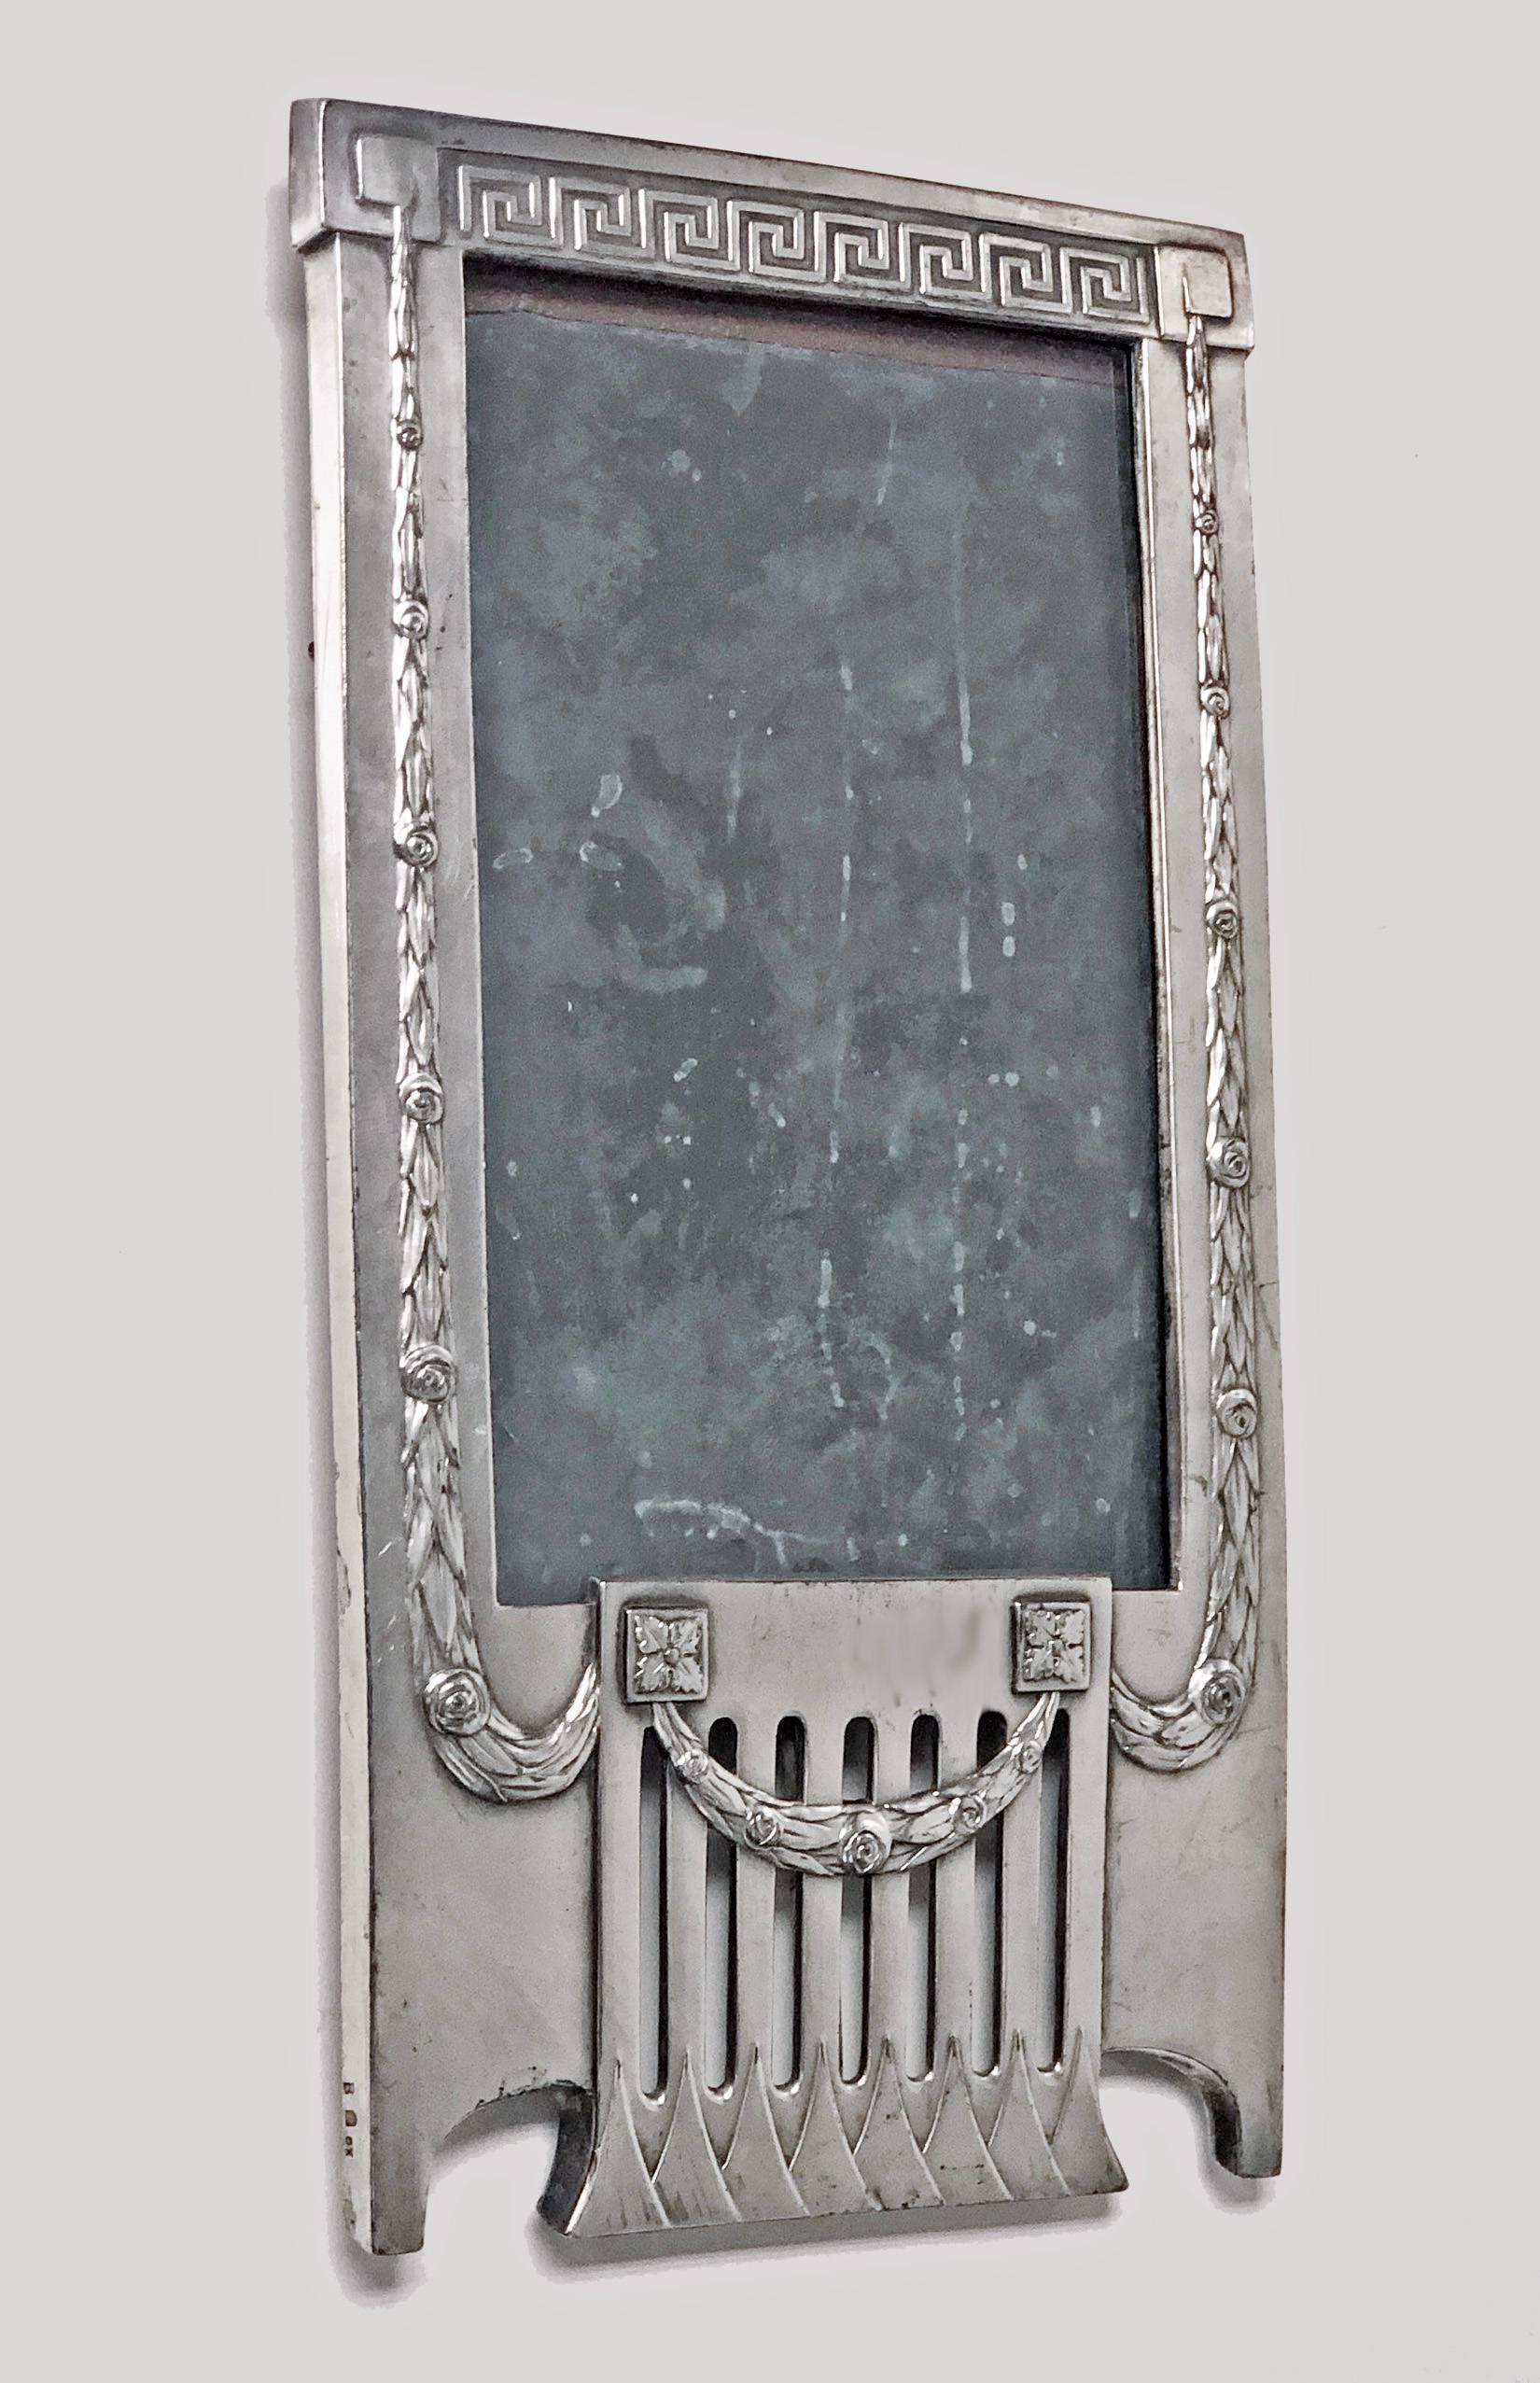 WMF Jugendstil Art Nouveau secessionist photograph frame, Germany, circa 1905. The rare design pewter frame of horizontal rectangular shape with elongated open panel triangular panel lower frieze, the surround of frame festoon wreath and Greek key